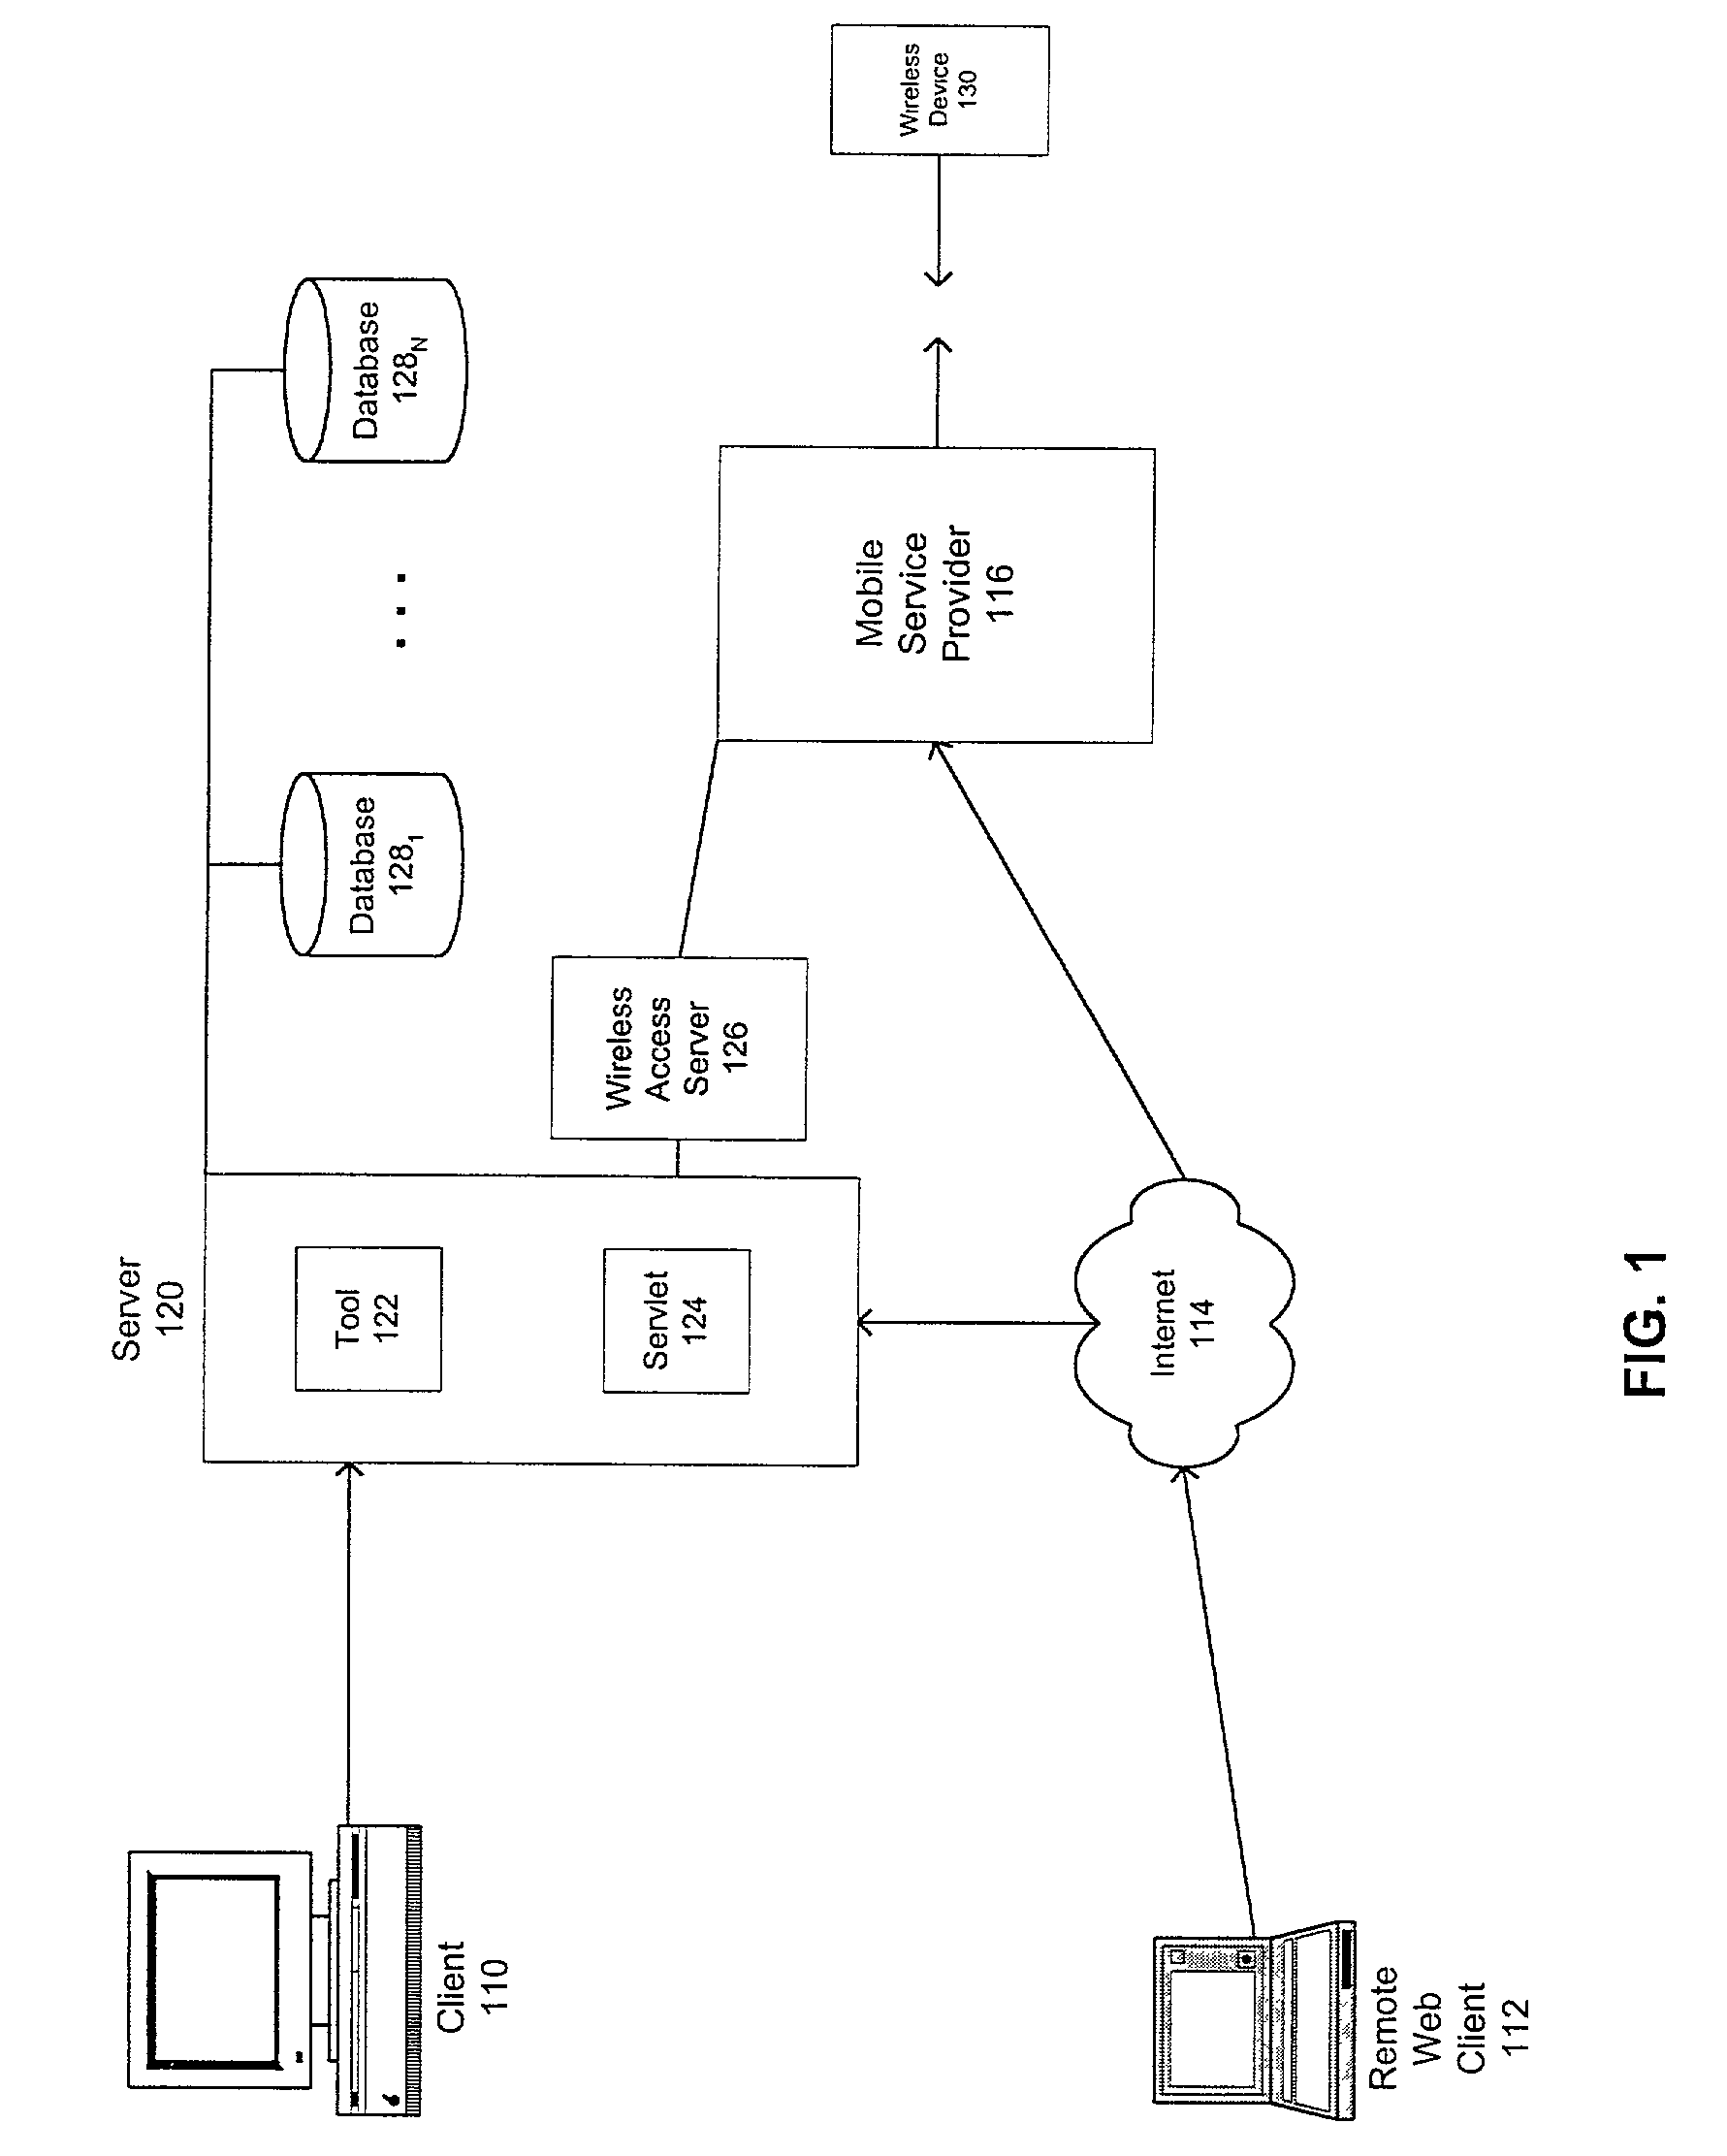 System and method for providing search capabilties on a wireless device